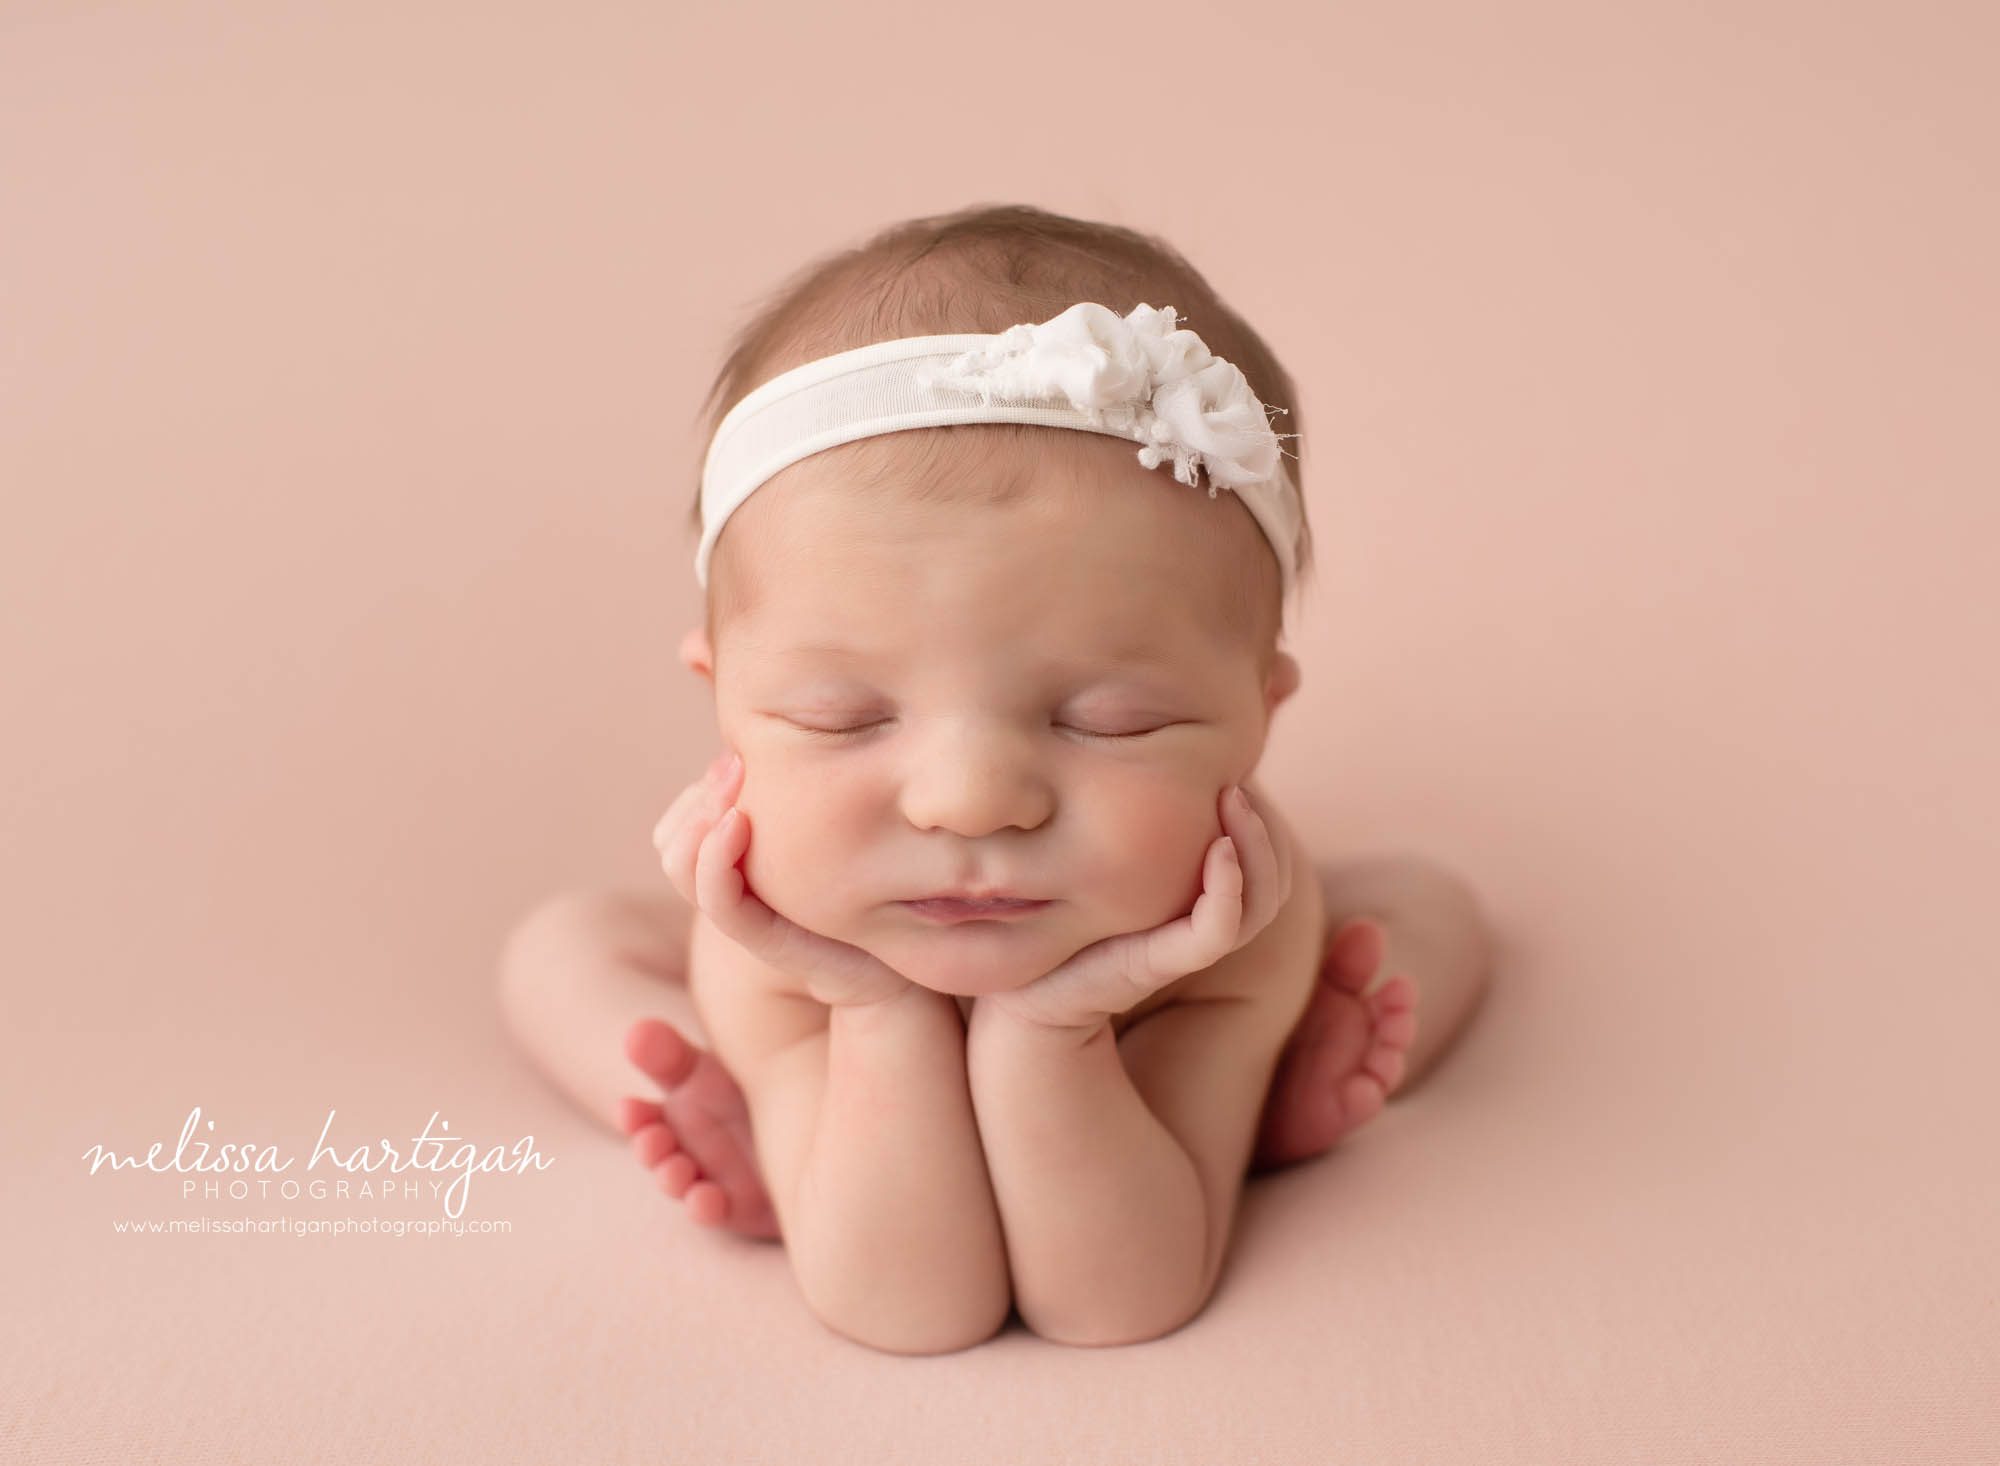 newborn baby girl posed in froggy pose with white headband